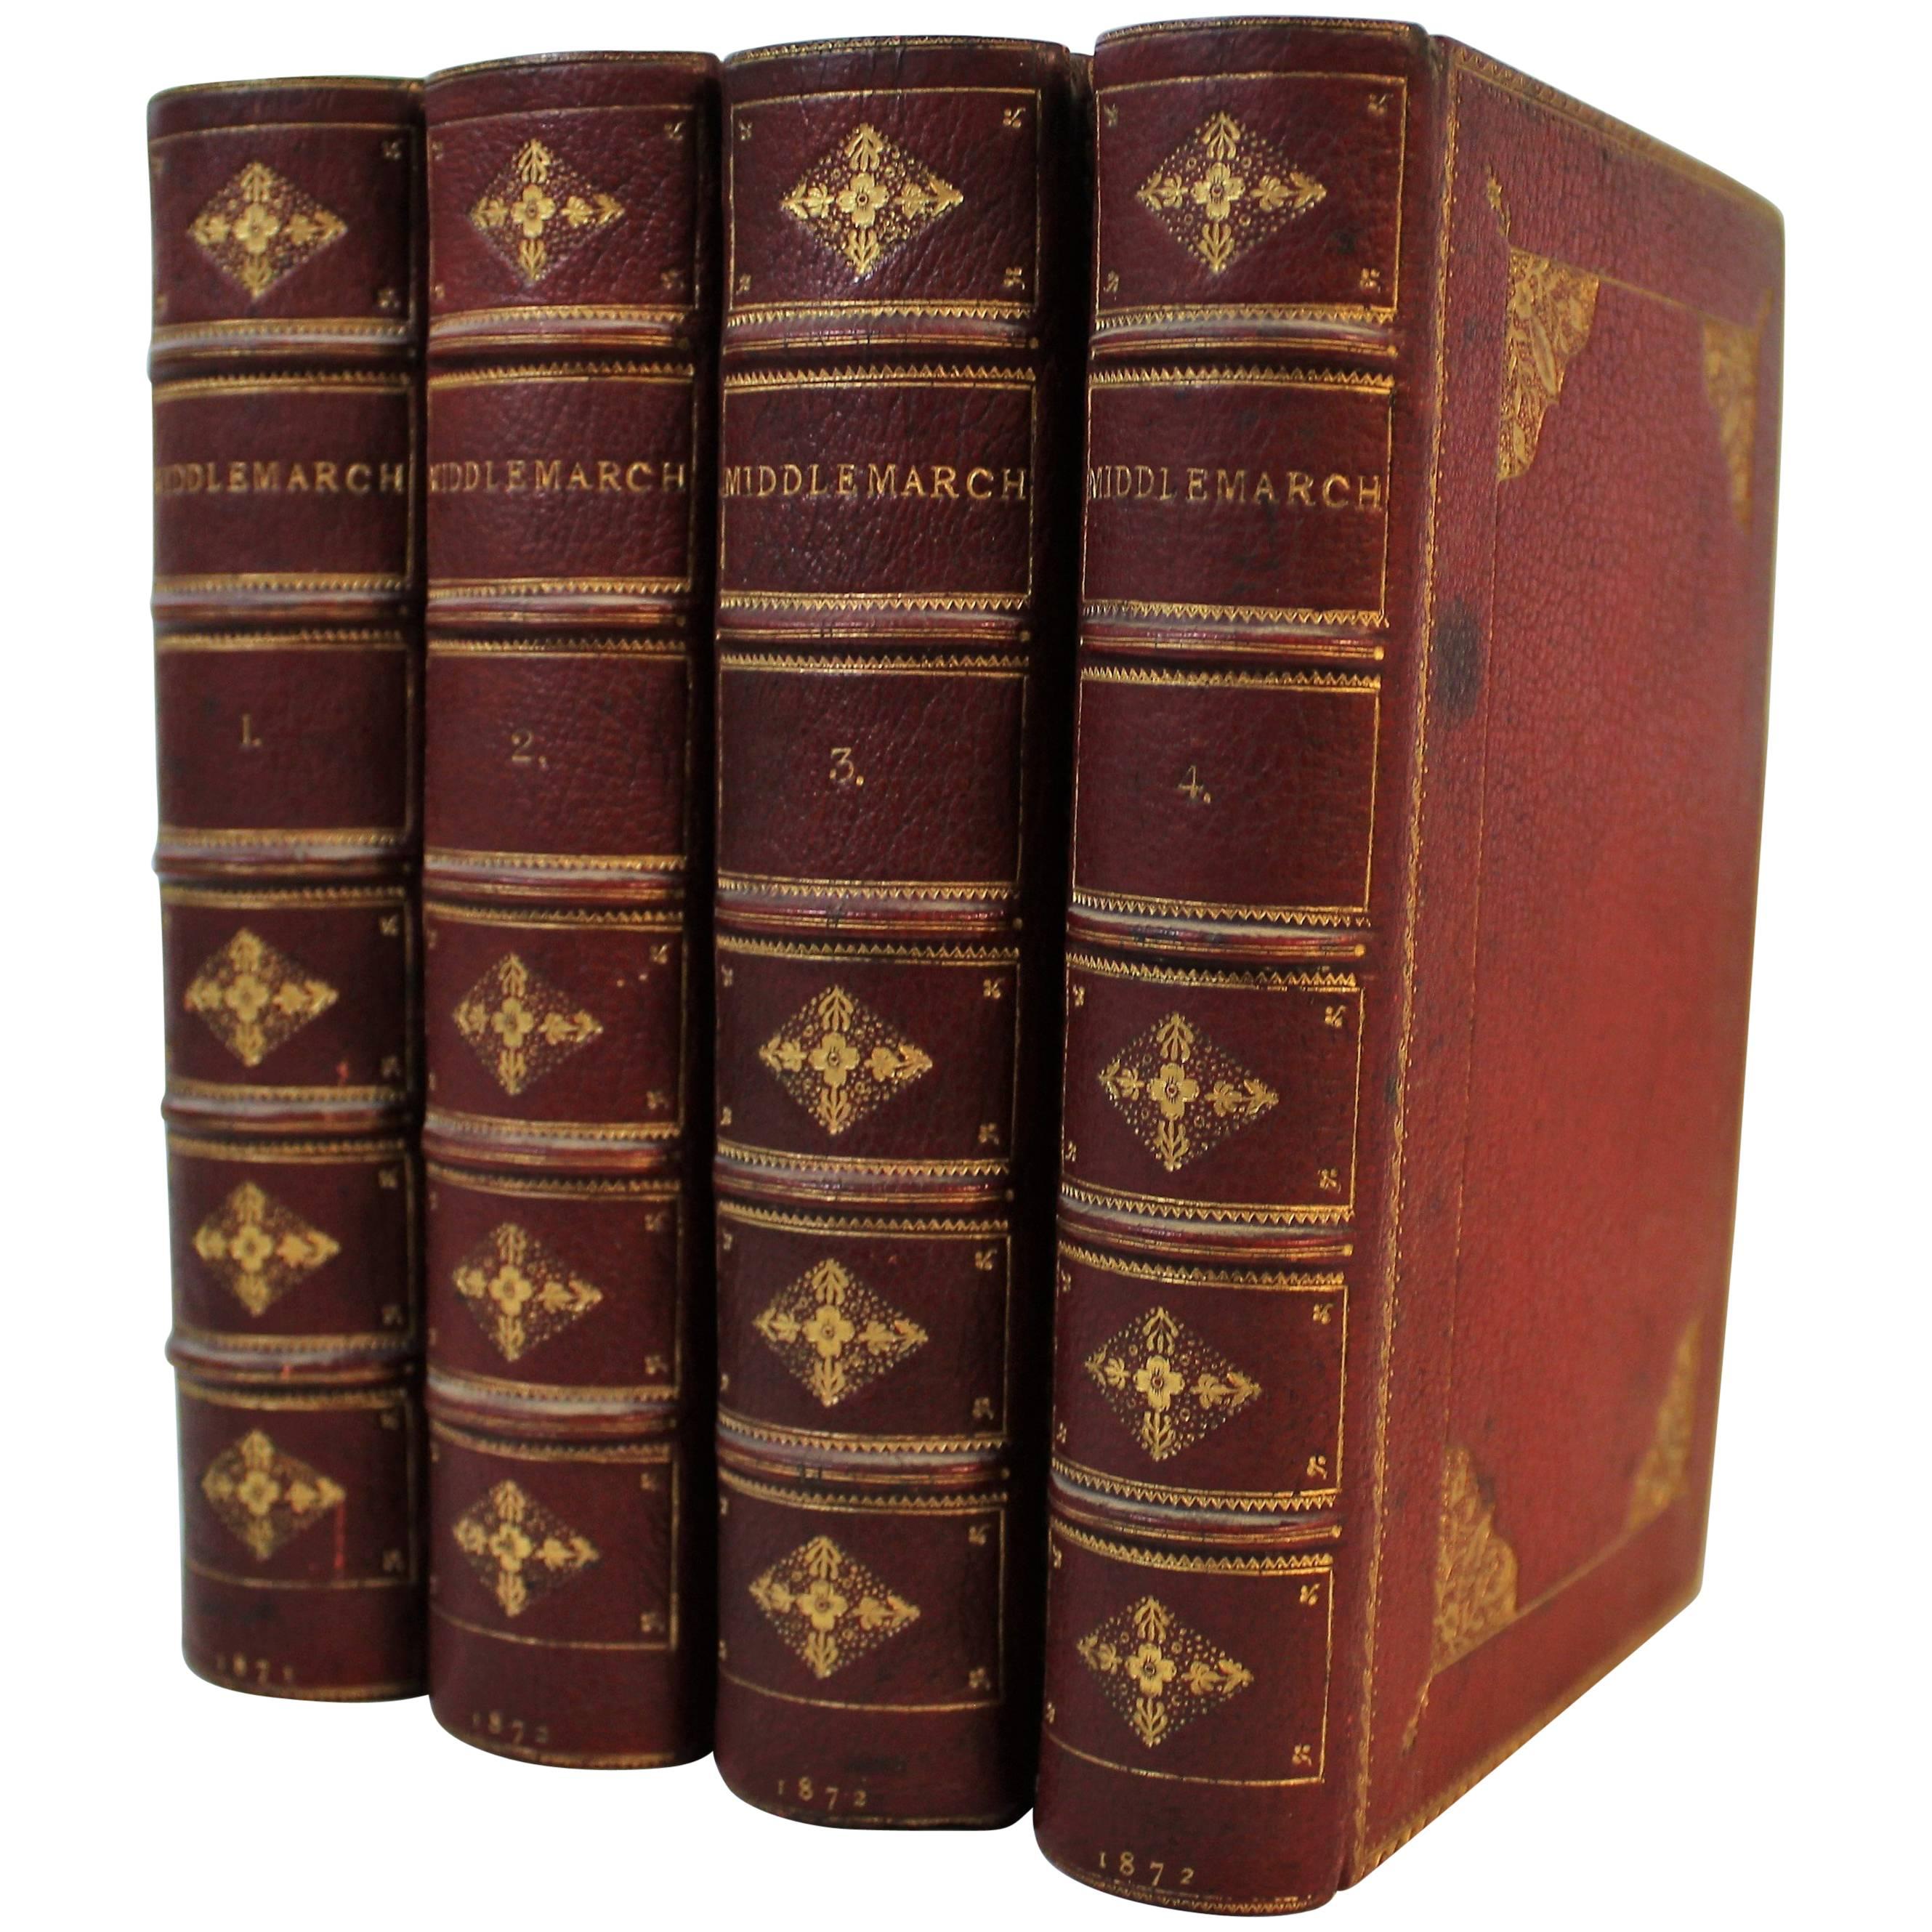 'Middlemarch' First Edition Books by George Eliot